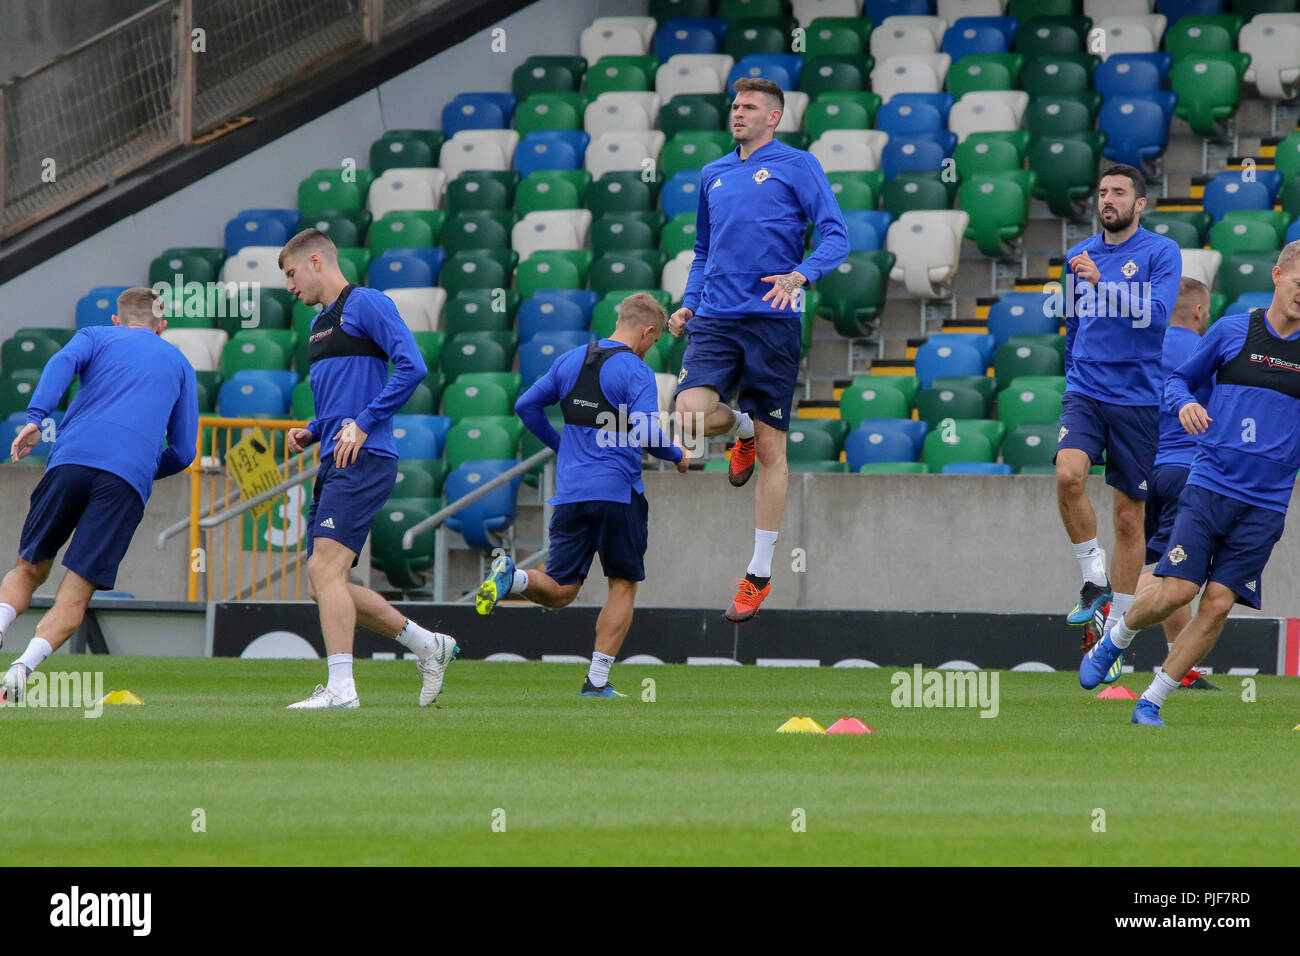 Windsor Park, Belfast, Northern Ireland. 07 September 2018. Northern Ireland in training this morning at Windsor Park before tomorrow night's UEFA Nations League at the stadium against Bosnia & Herzegovina. Kyle Lafferty jumps in training. Credit: David Hunter/Alamy Live News. Stock Photo